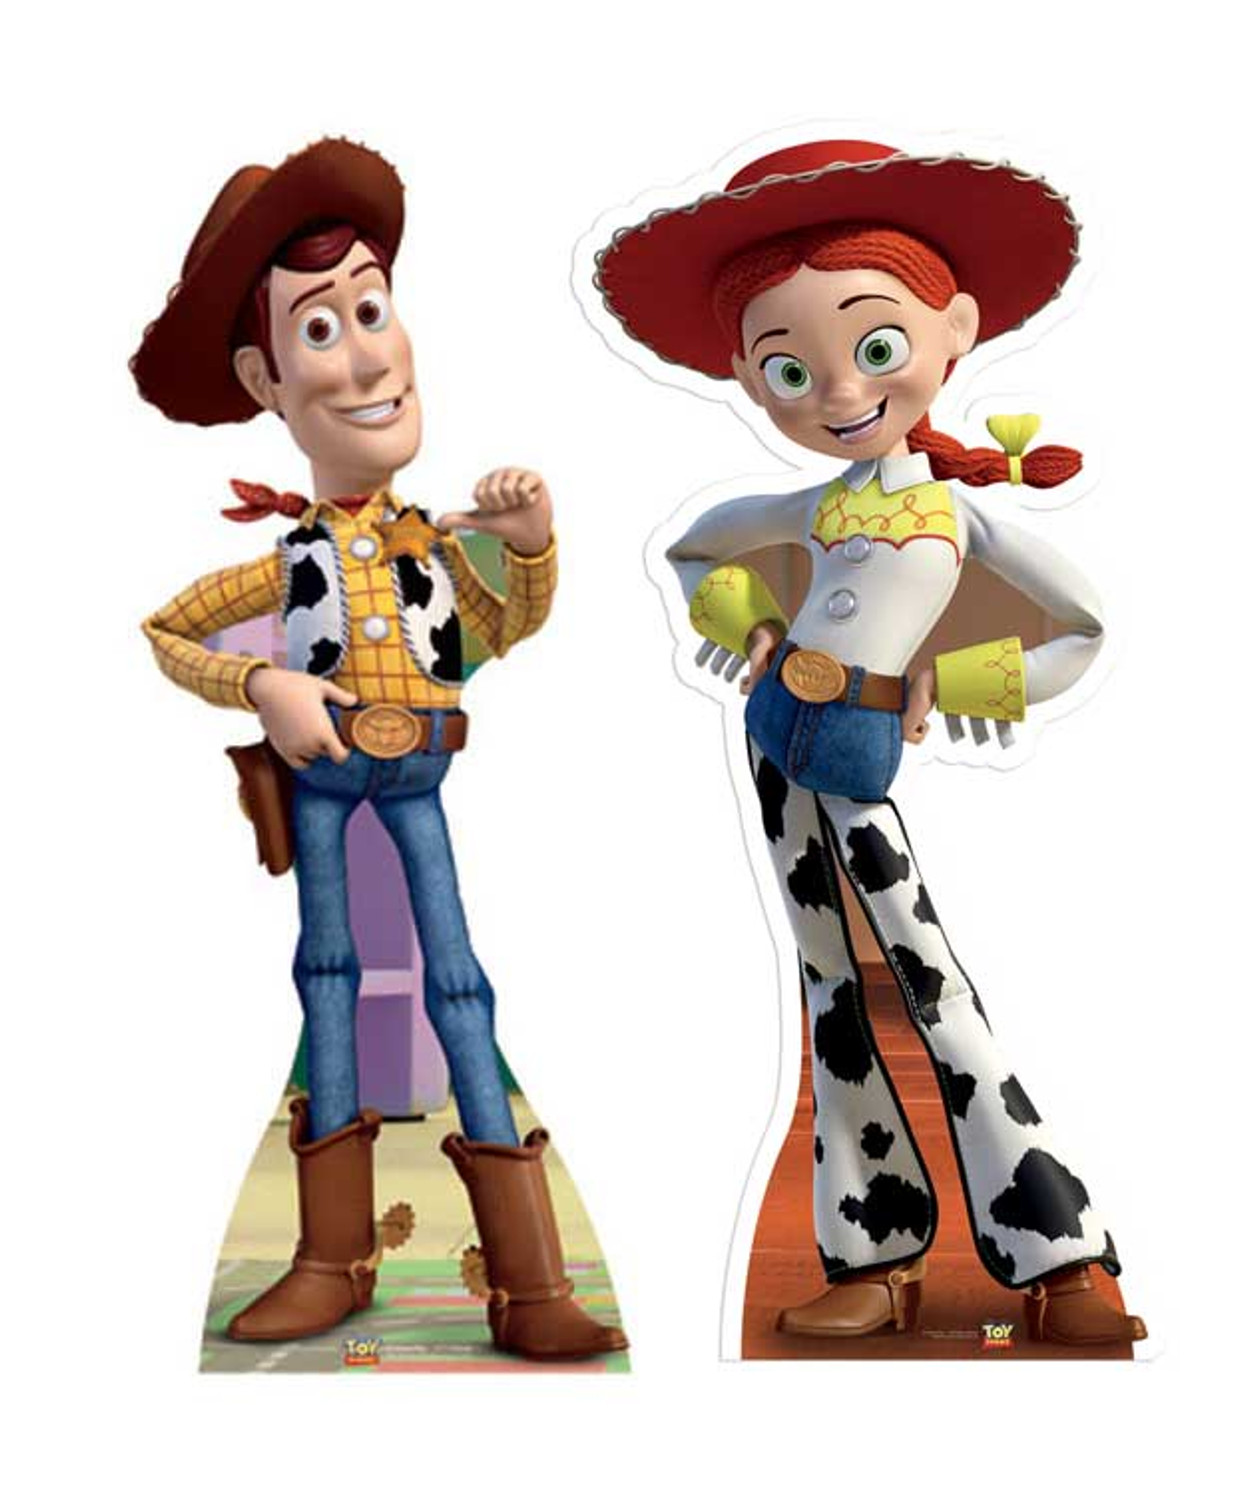 conner quinn recommends pics of jessie from toy story pic